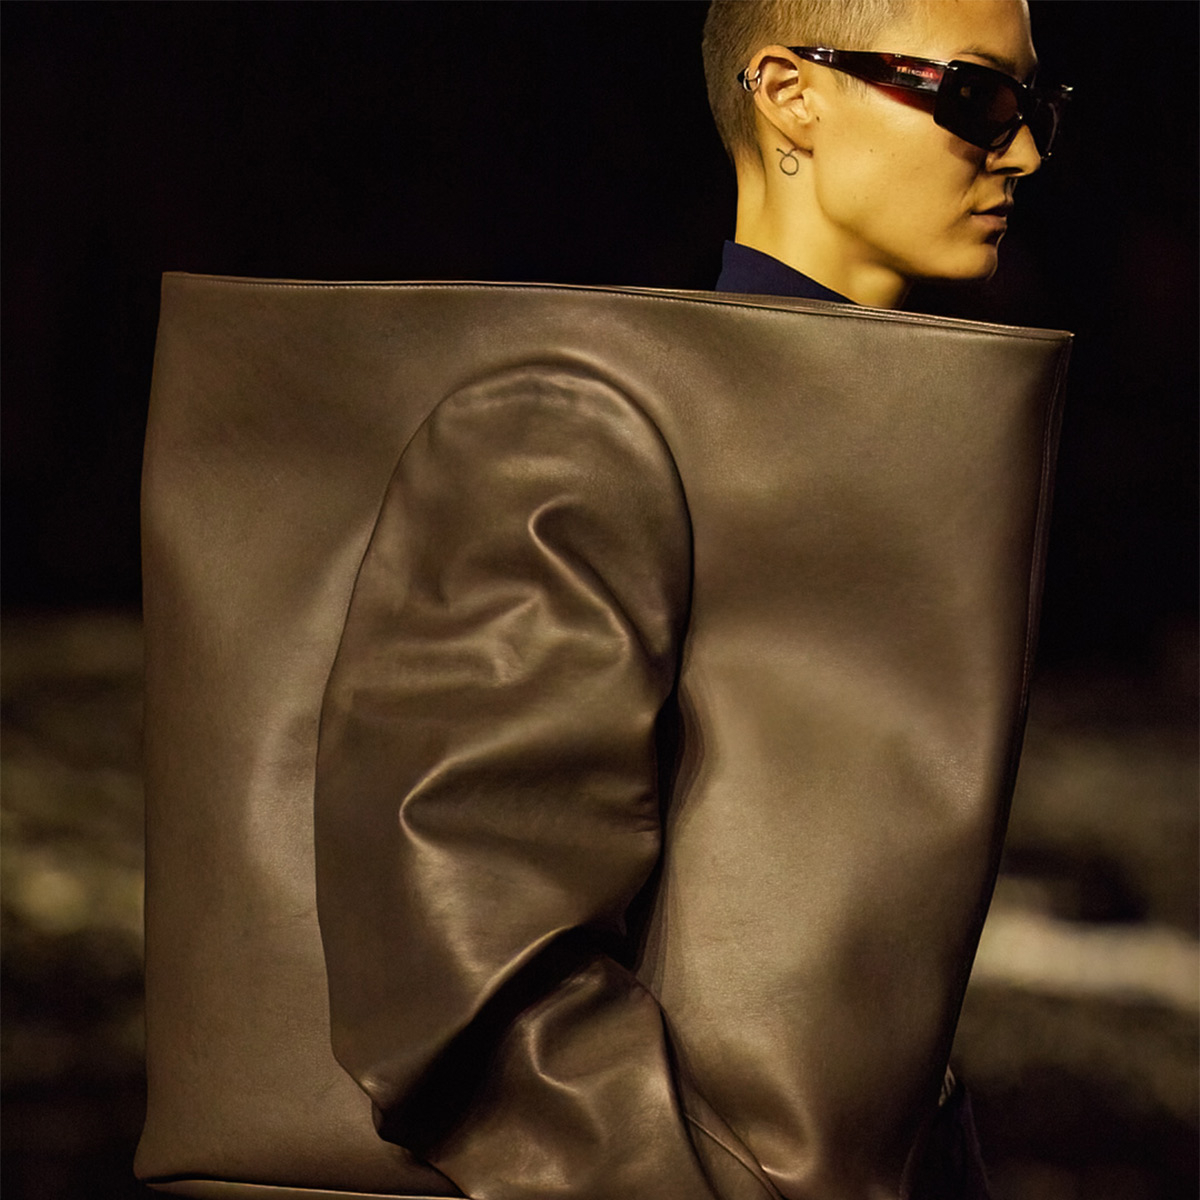 Luxury Fashion: Video of Balenciaga's 'One-Sleeved' Shoulder Bag Sparks  Mixed Reactions 